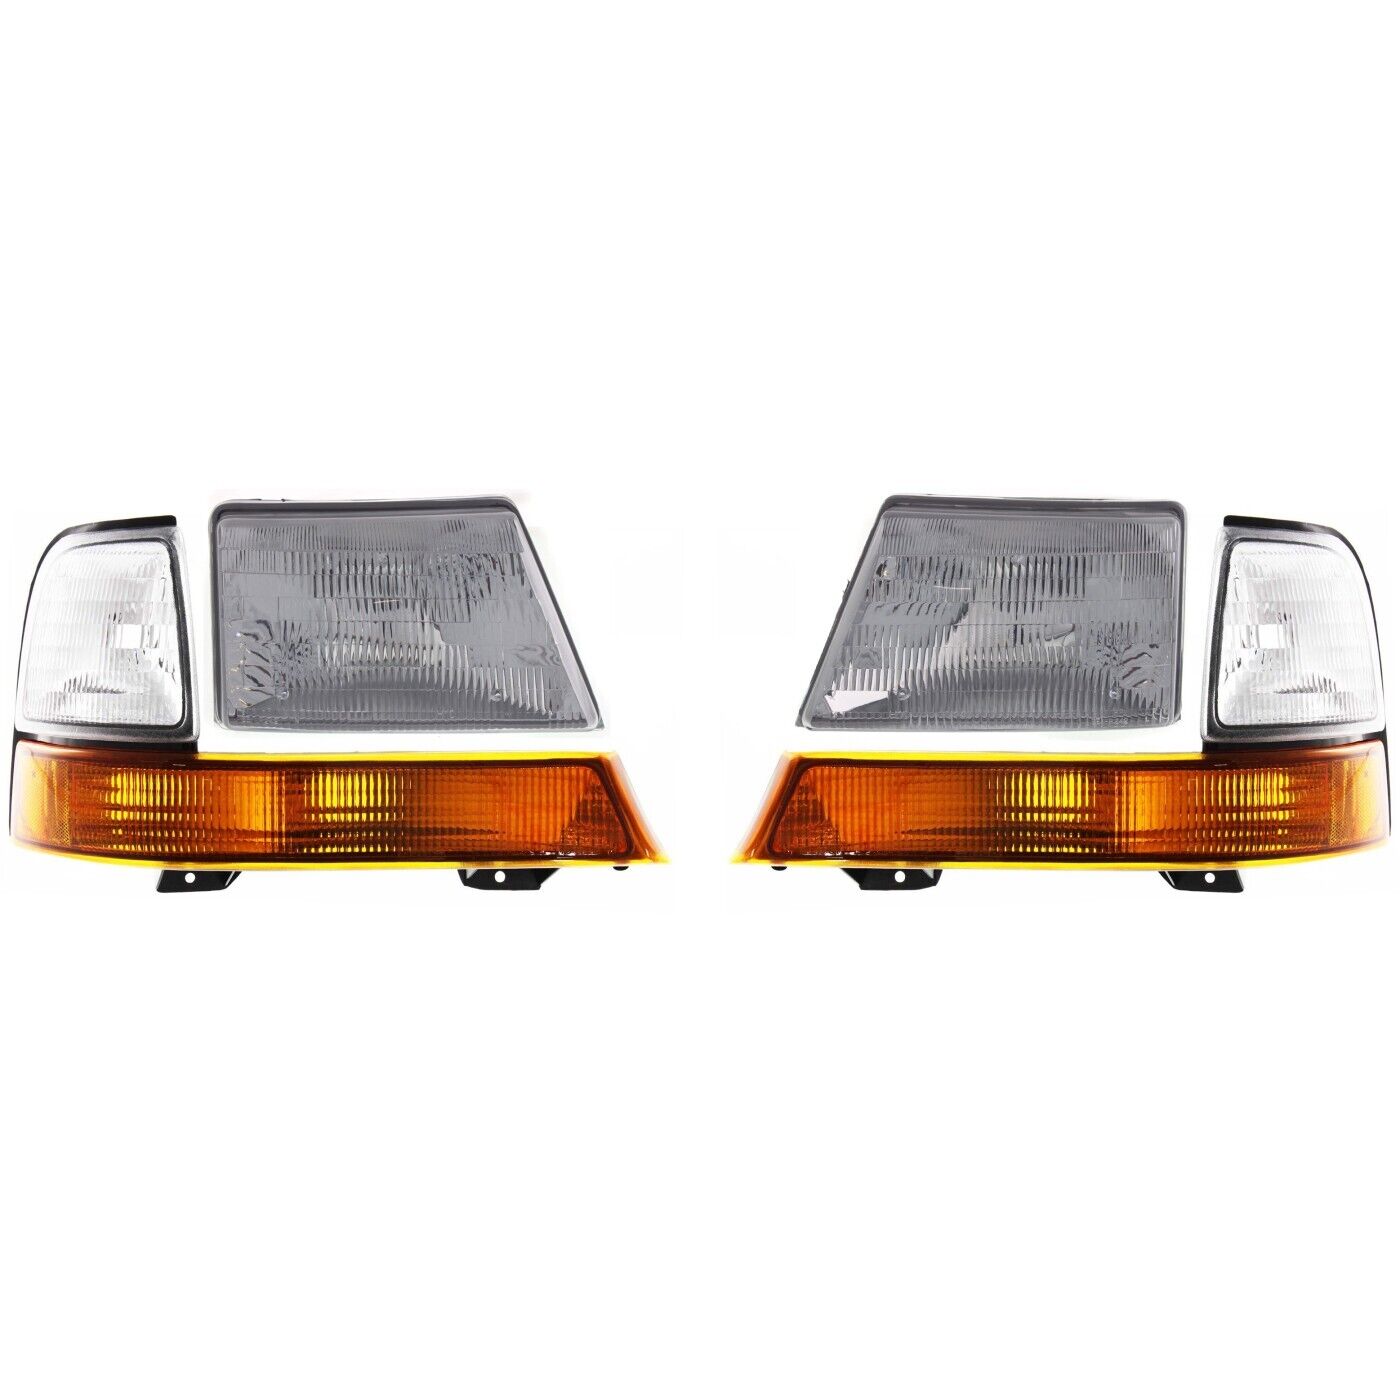 Headlight Kit For 1998-2000 Ford Ranger FO2502151 FO2503151 FO2521144 FO2520144